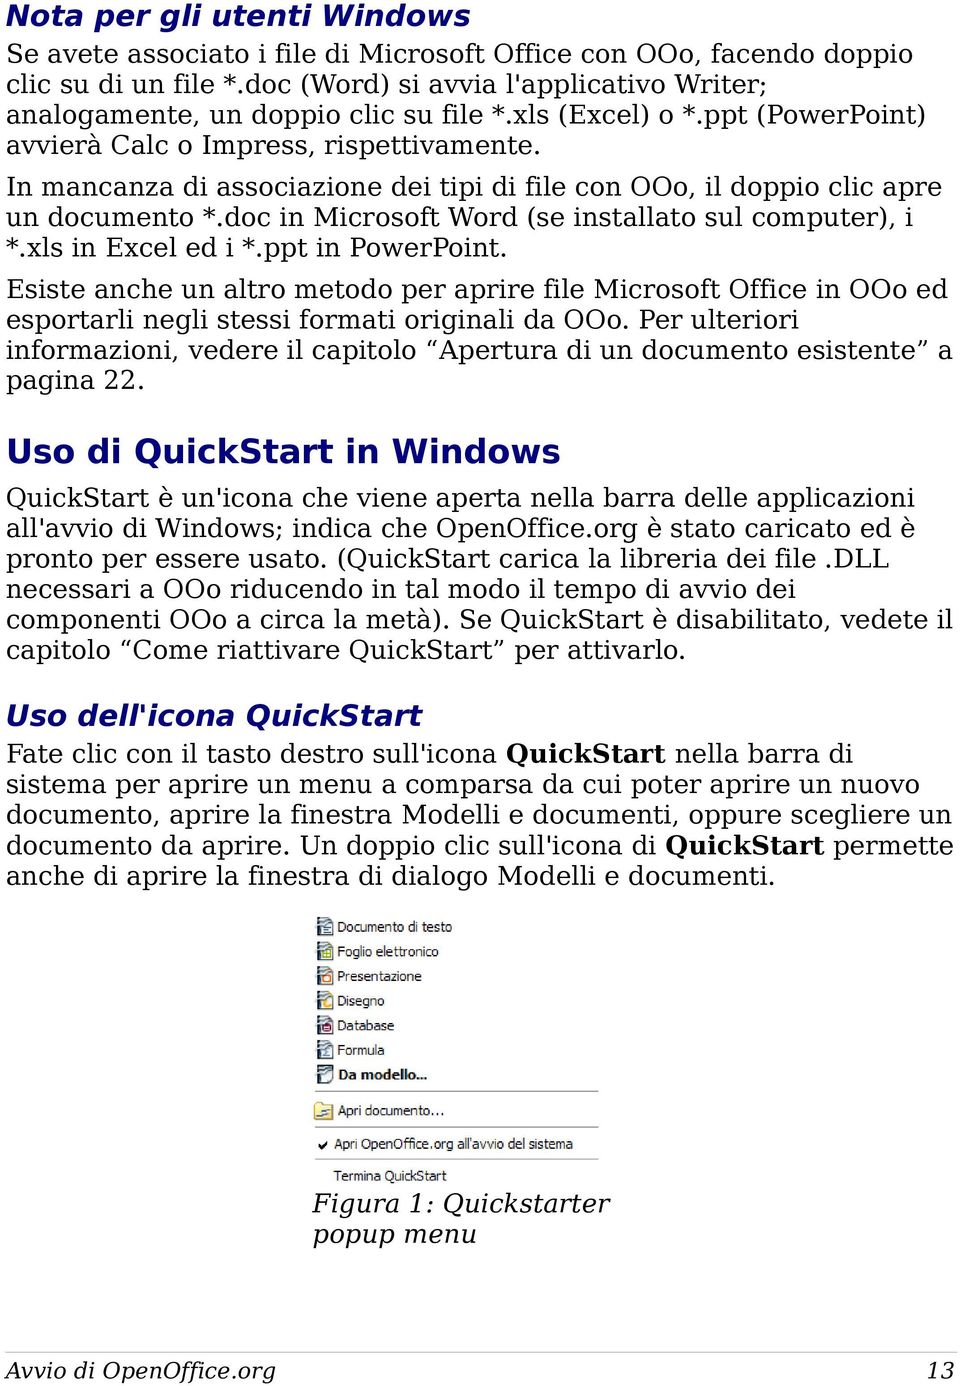 doc in Microsoft Word (se installato sul computer), i *.xls in Excel ed i *.ppt in PowerPoint.